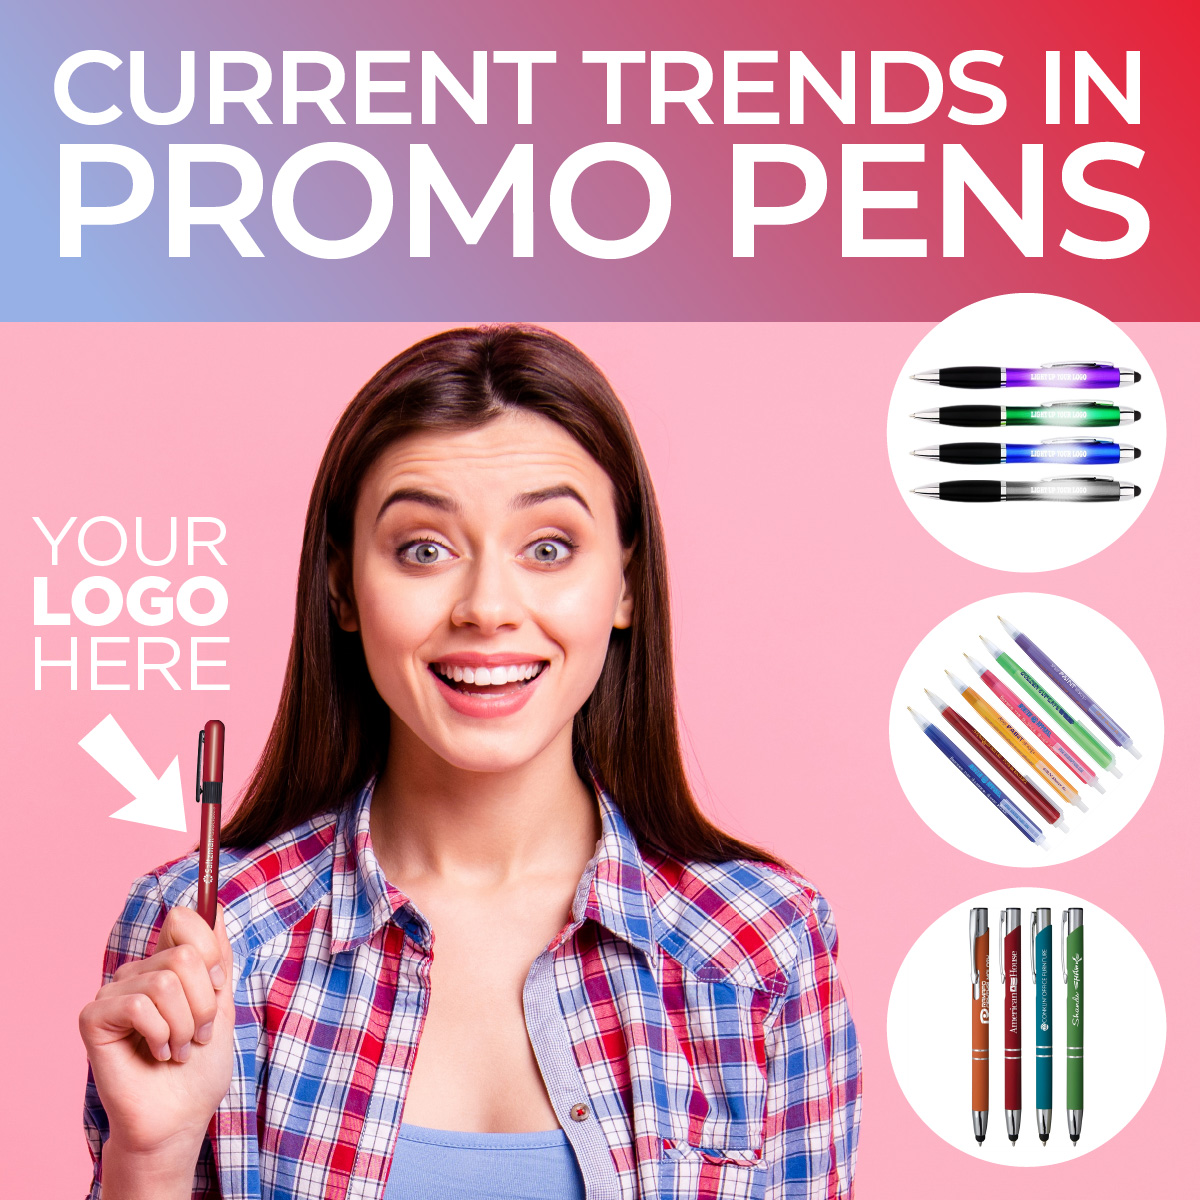 Current Trends in Promo Pens